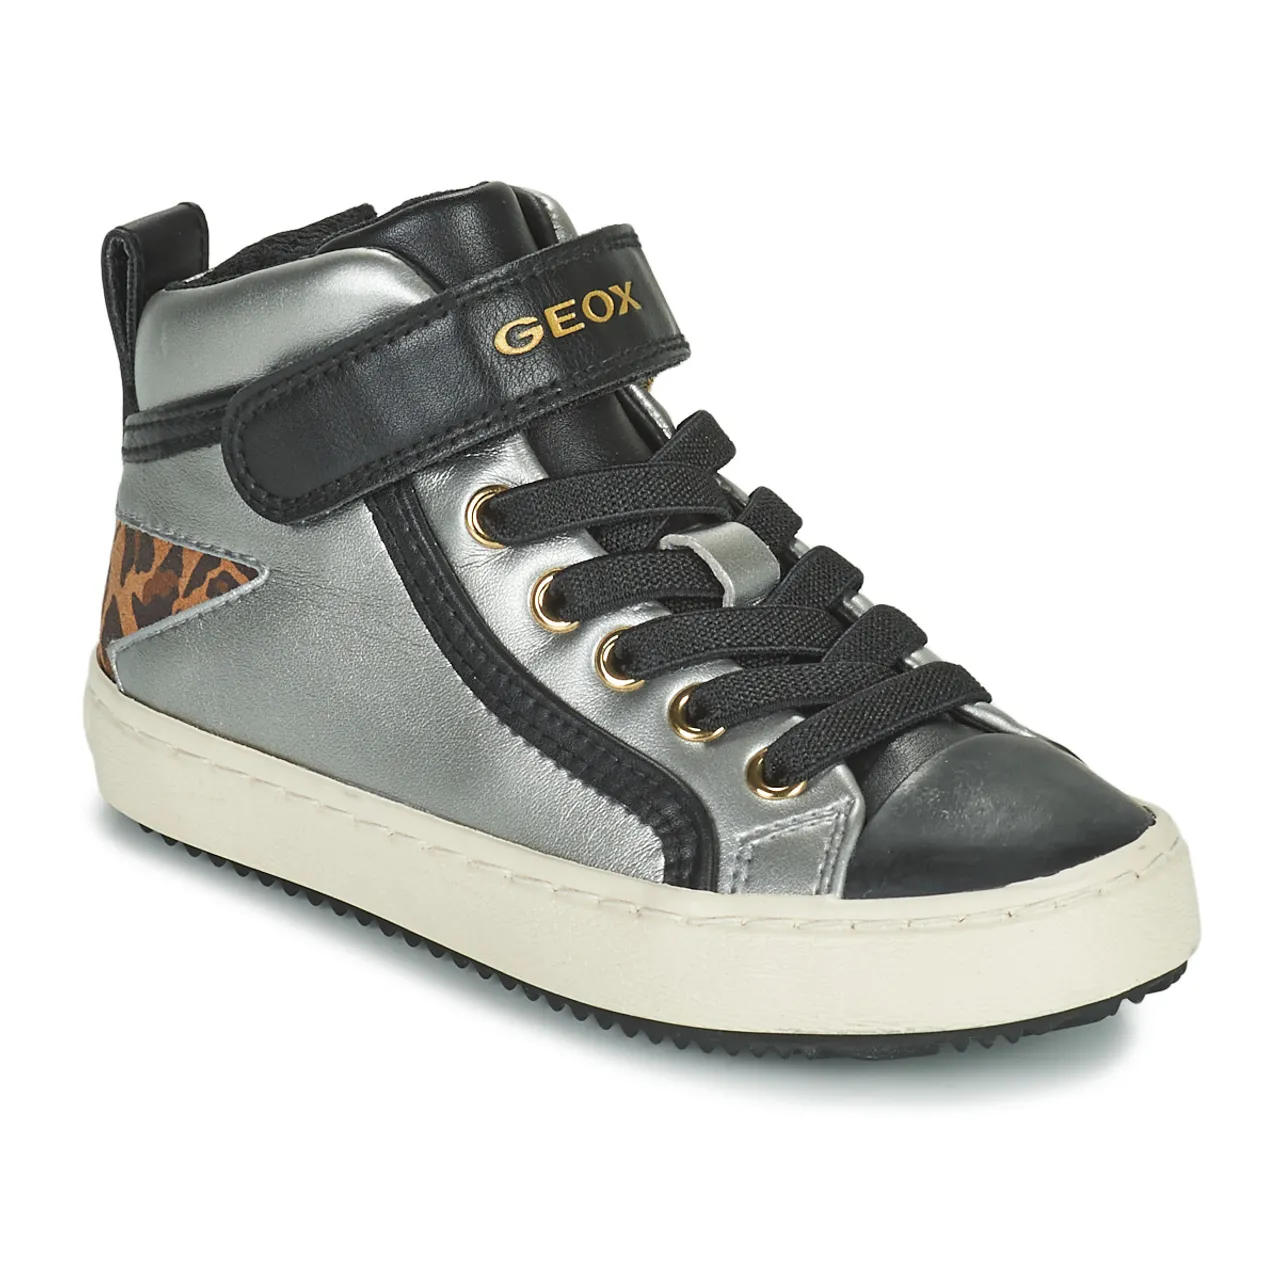 Geox  KALISPERA  girls's Children's Shoes (High-top Trainers) in Silver